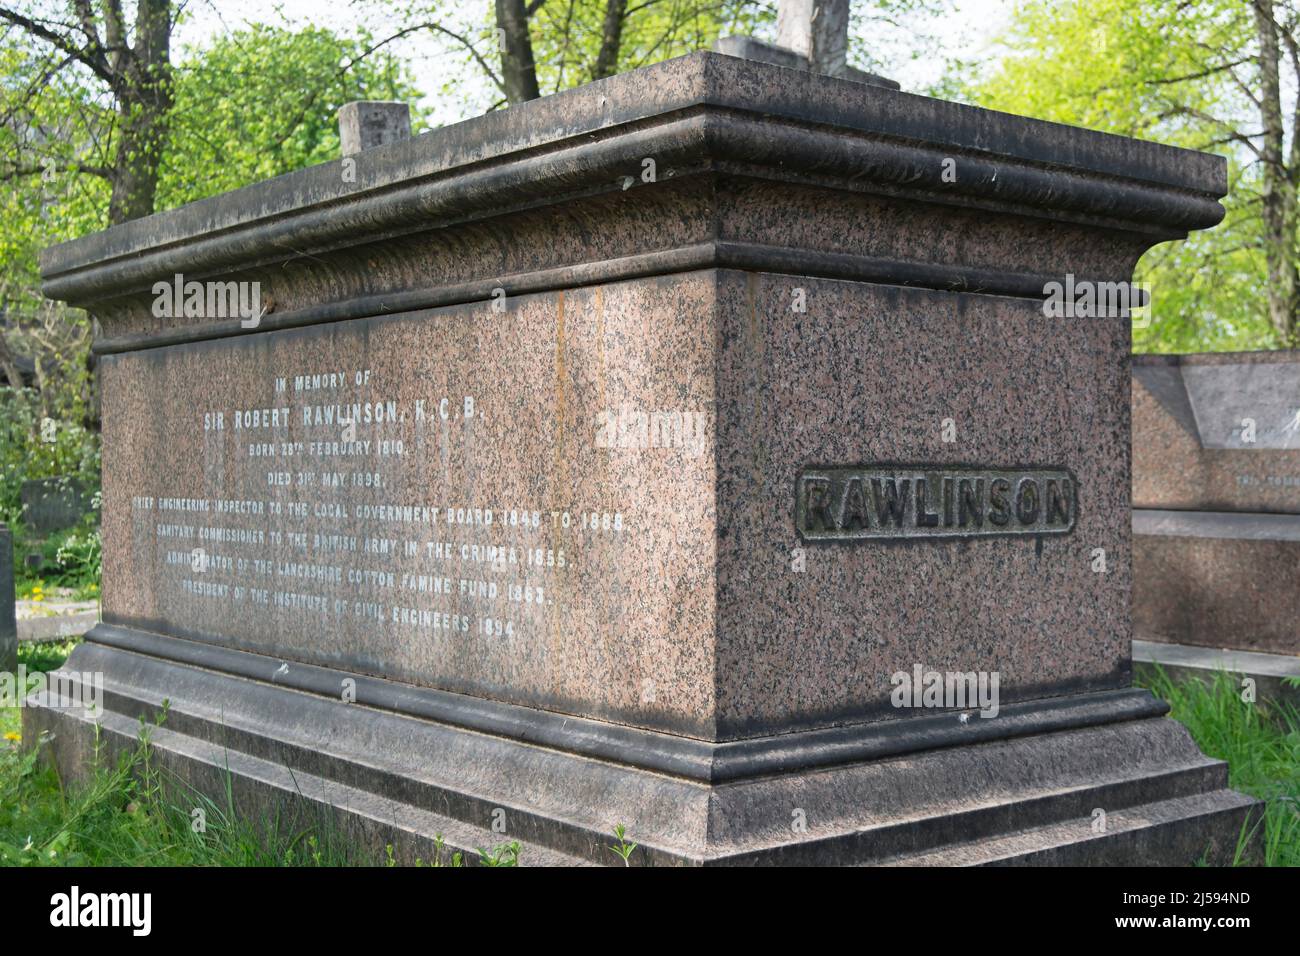 the tomb of 19th century engineer and sanitarian, robert rawlinson, at brompton cemetery, london, england Stock Photo